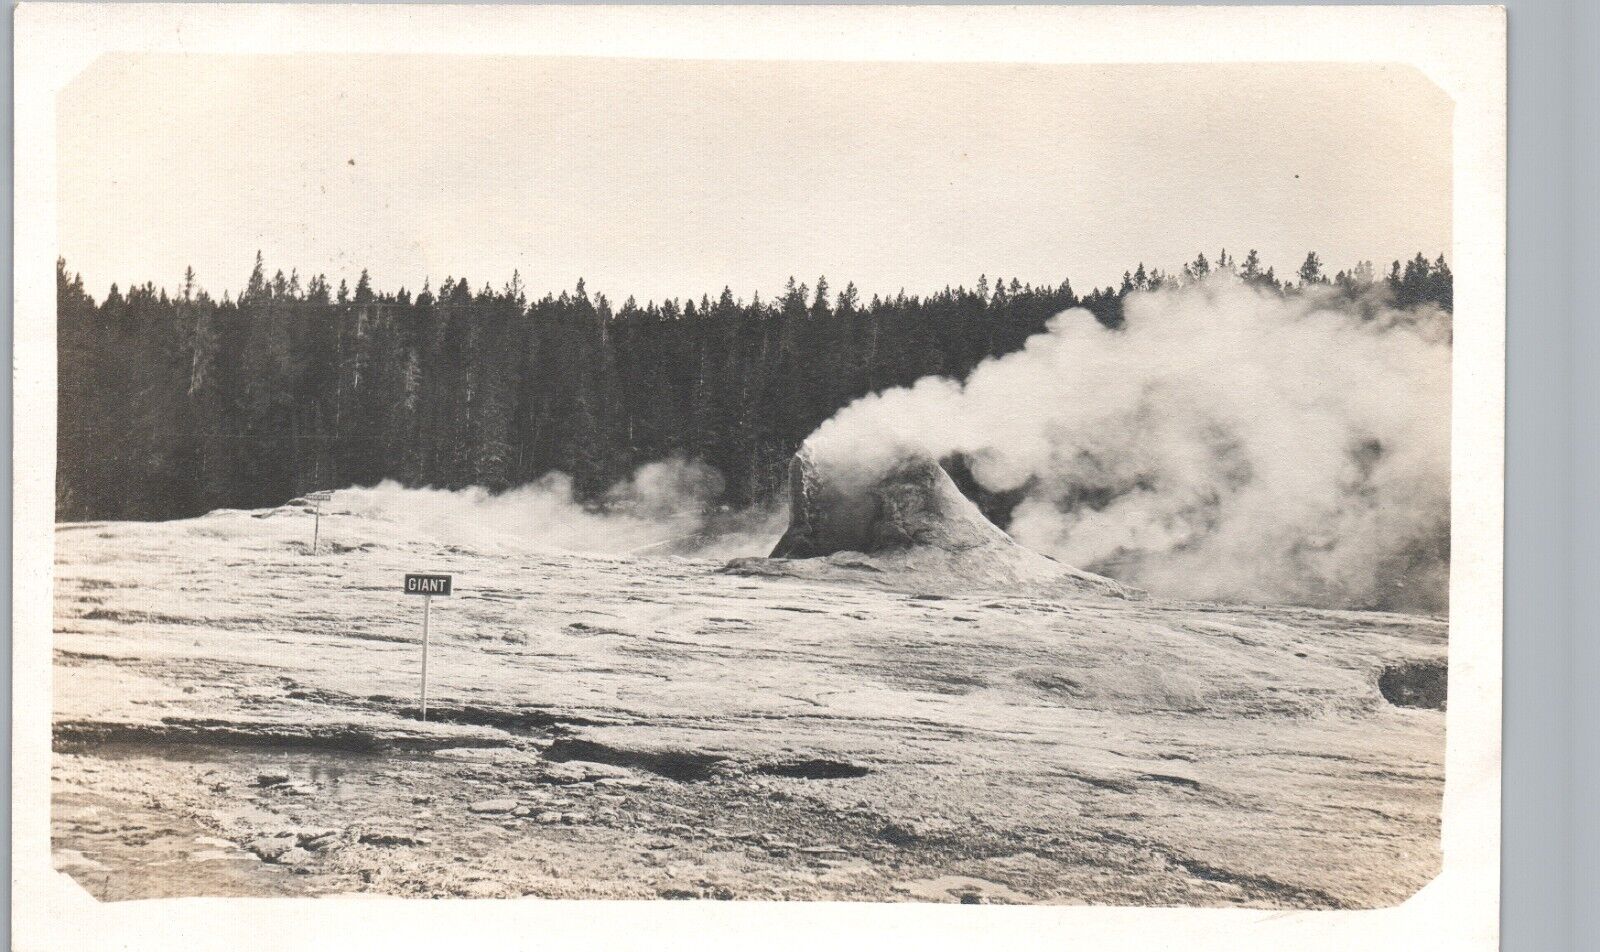 GIANT GEYSER YELLOWSTONE NATIONAL PARK real photo postcard rppc wyoming wy ~rare